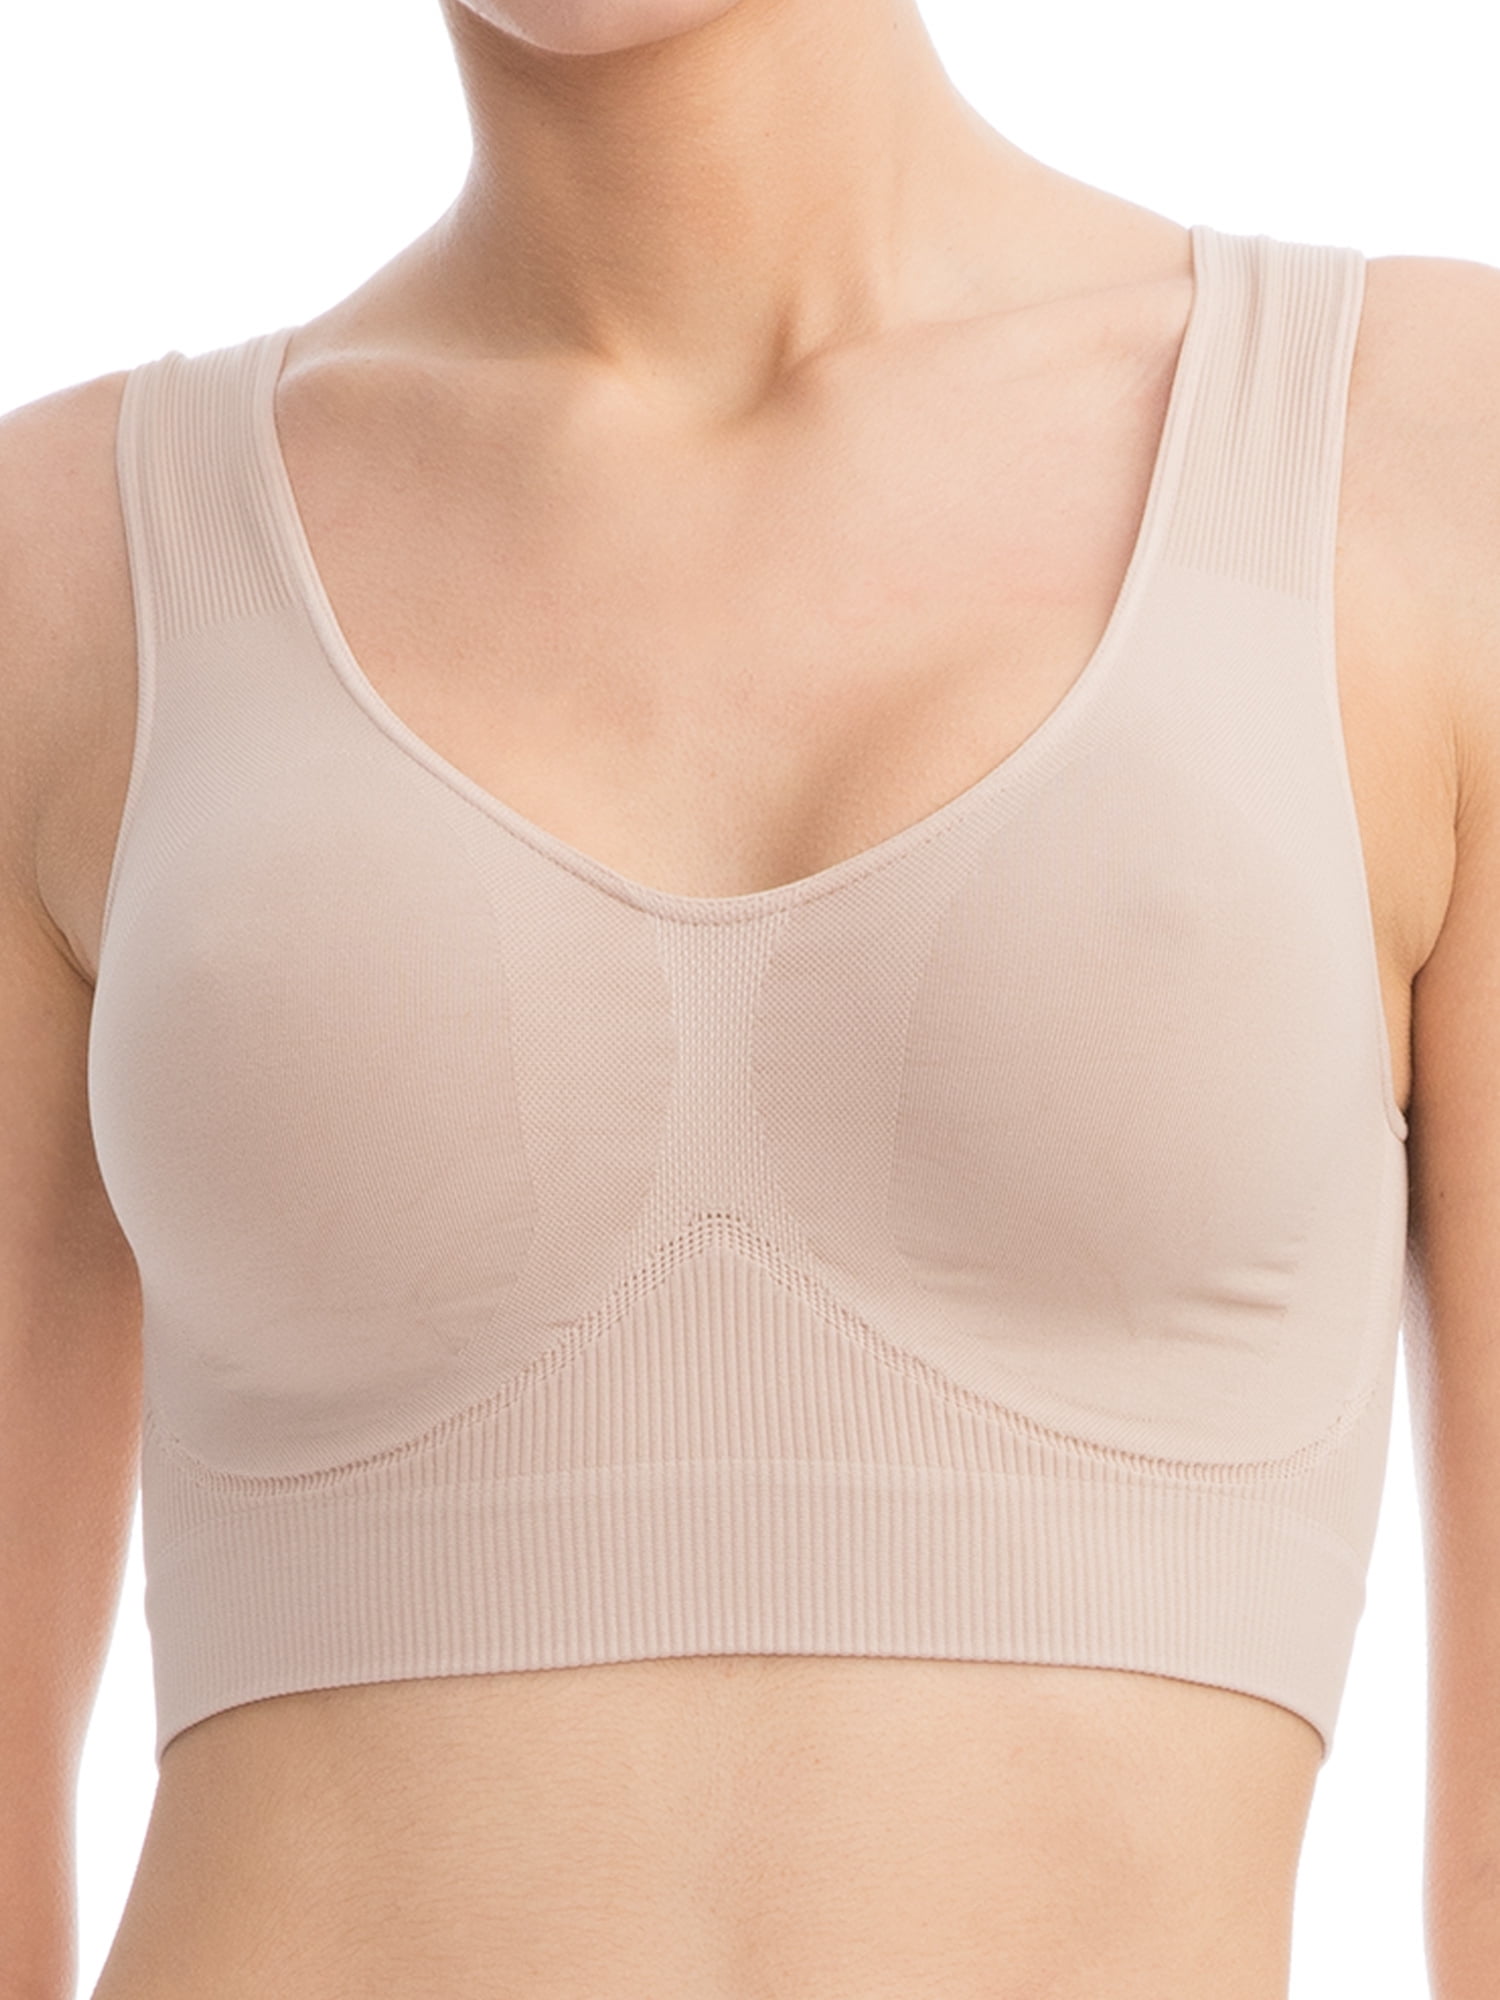 Breast Surgery Support Bra w/2 Elastic Band- BR02